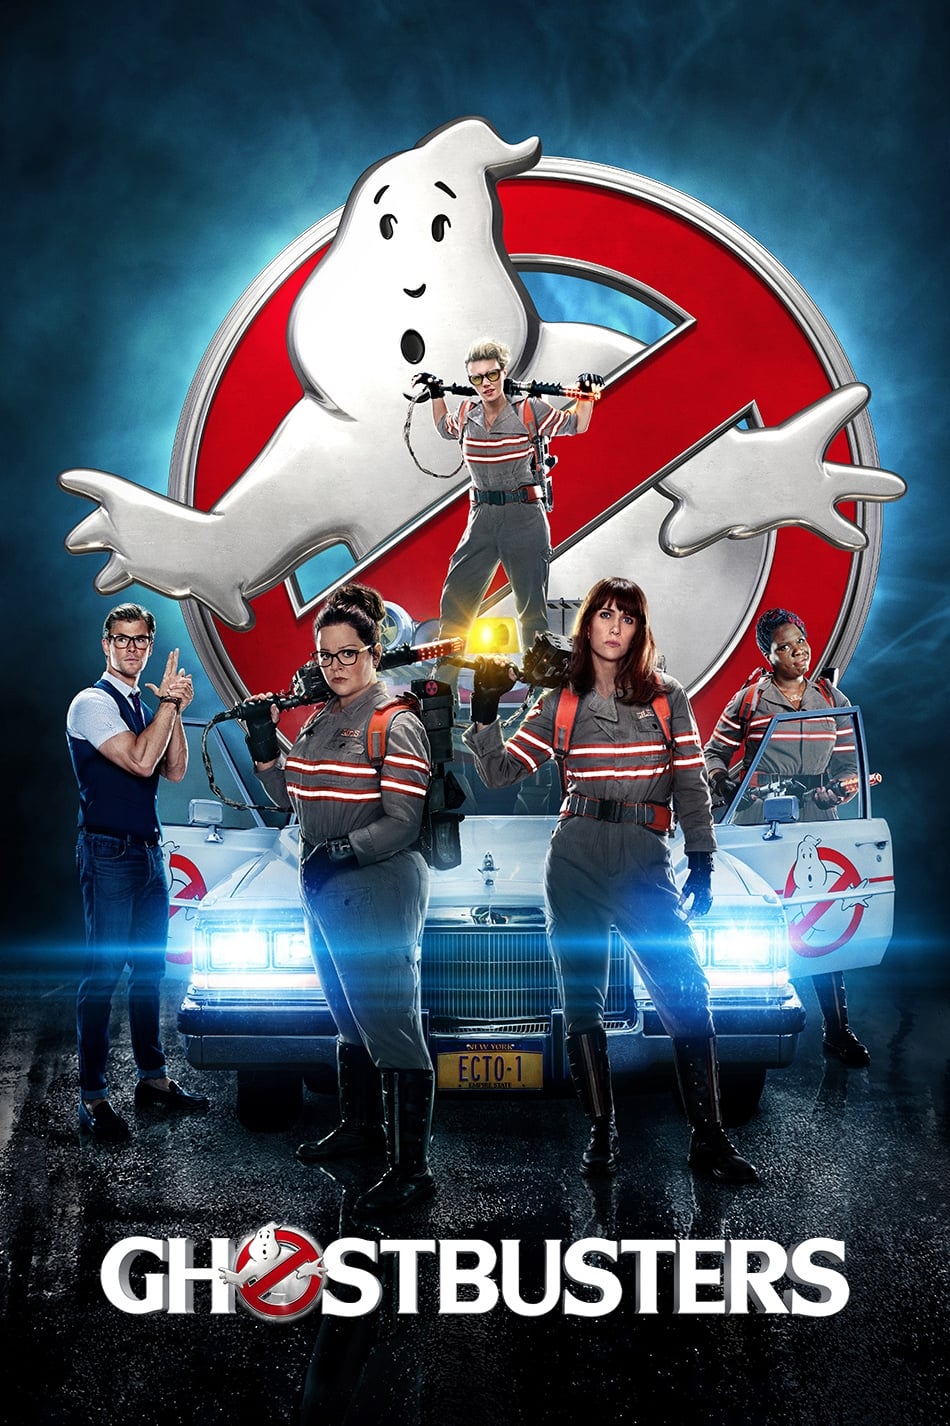 Ghostbusters (2016) [EXTENDED] REMUX 4K HDR Latino – CMHDD